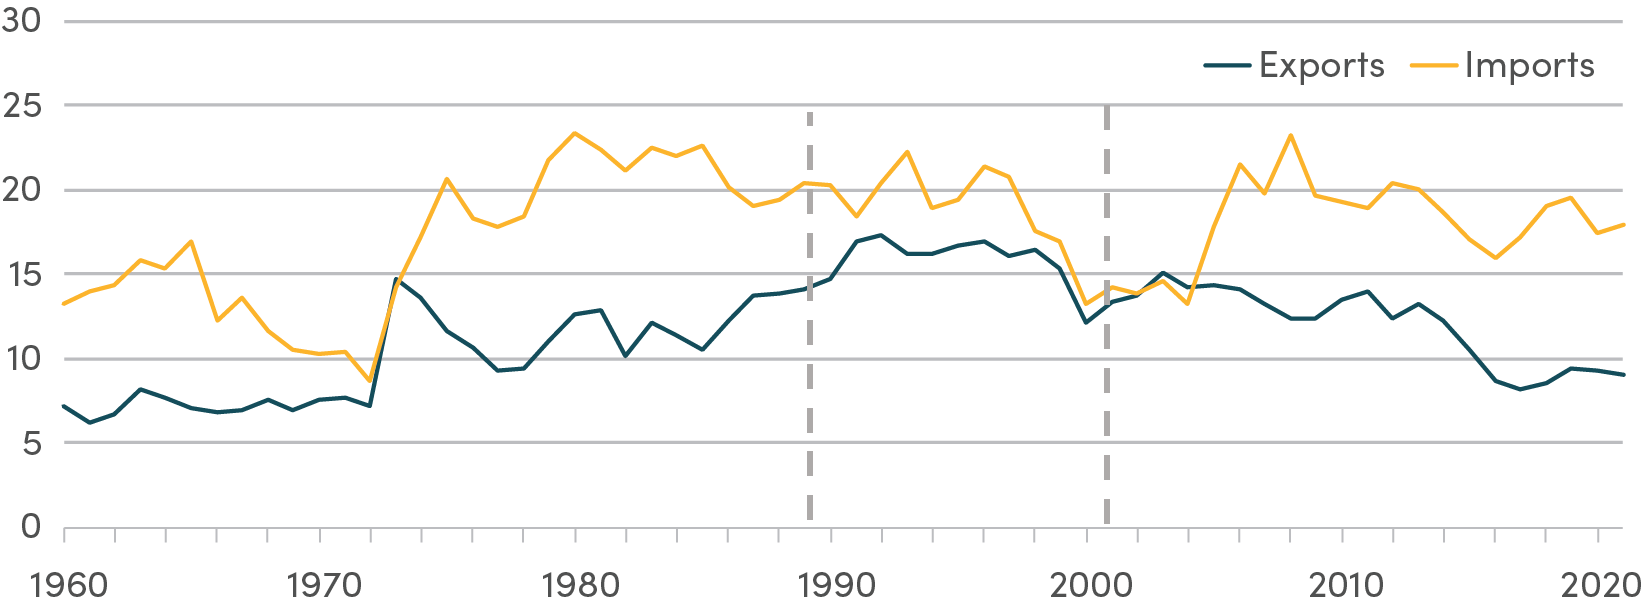 Figure 4. Trade performance: Imports and exports (% GDP)